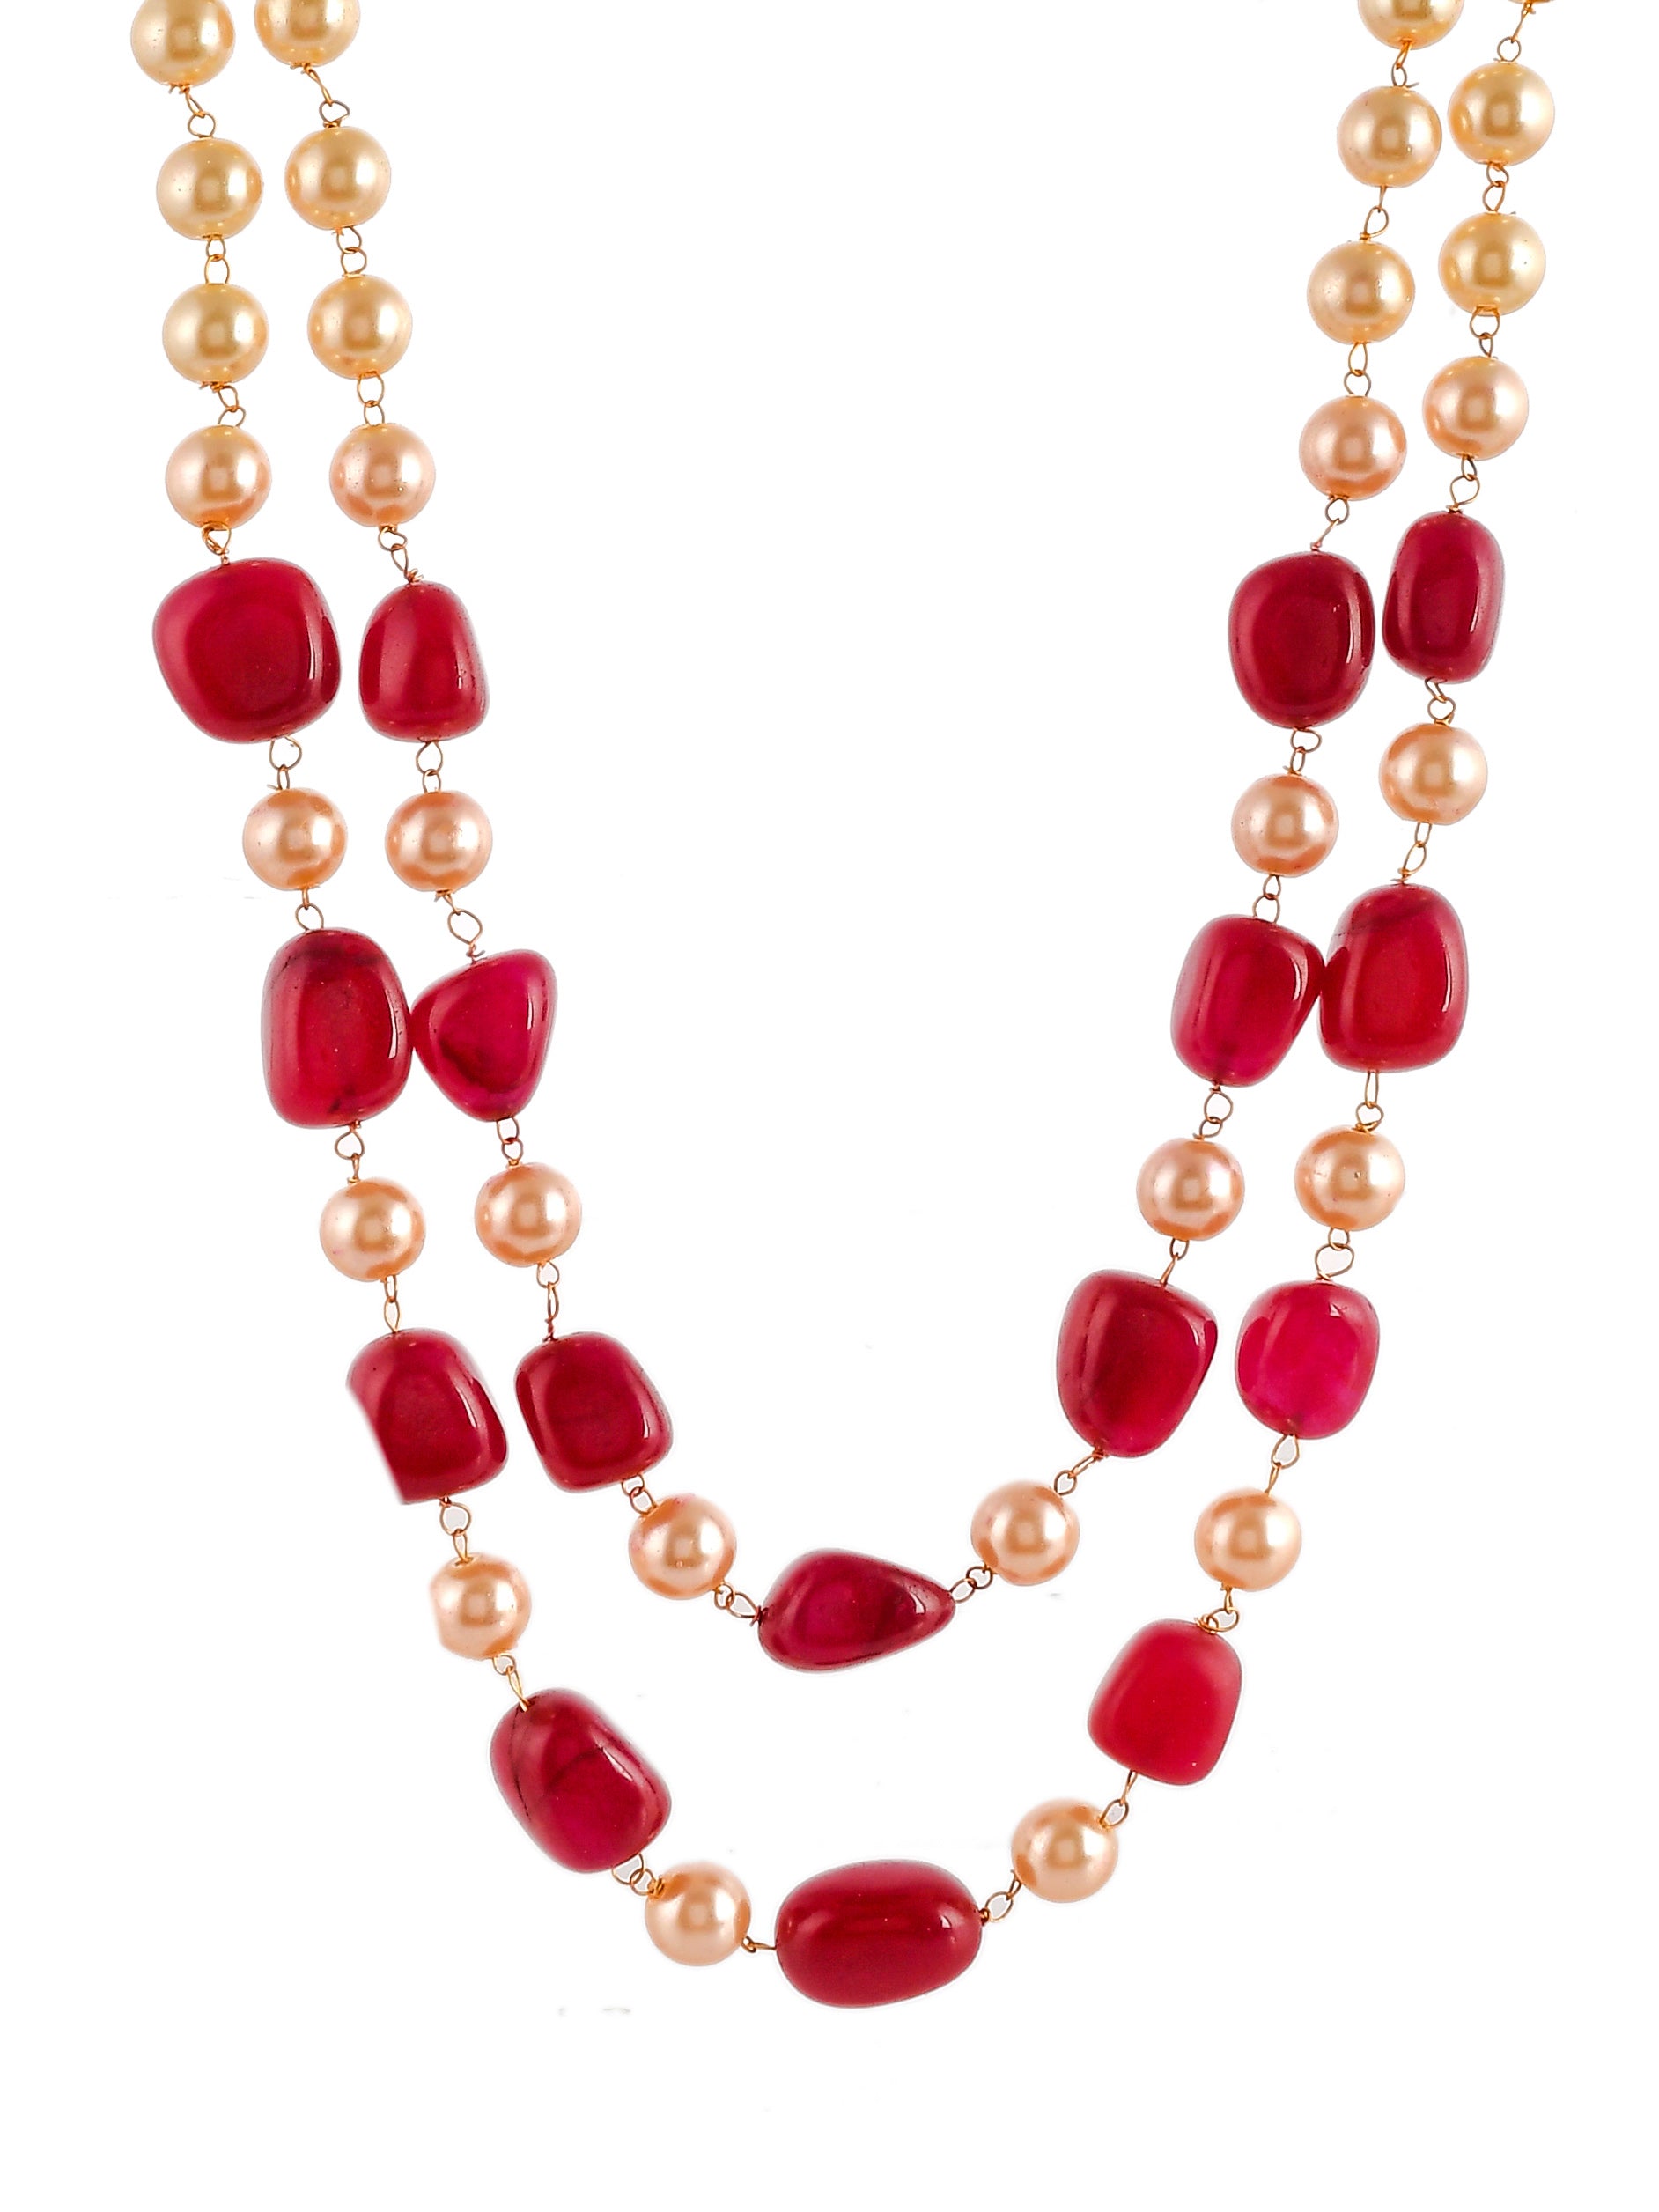 Unisex Red Gold Plated Beaded Layered Necklace